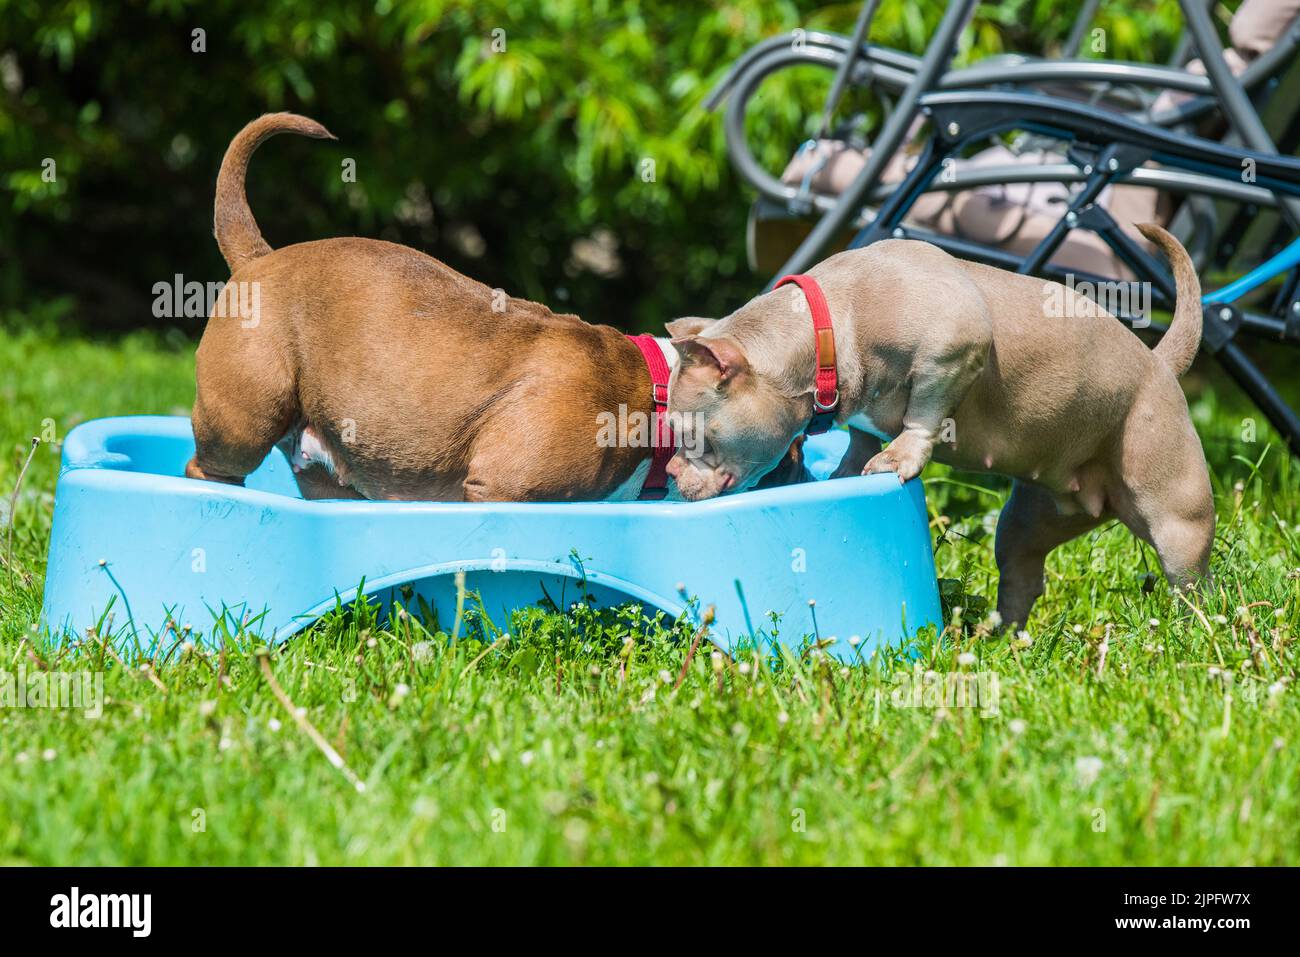 American Bully dogs are swimming in pool Stock Photo